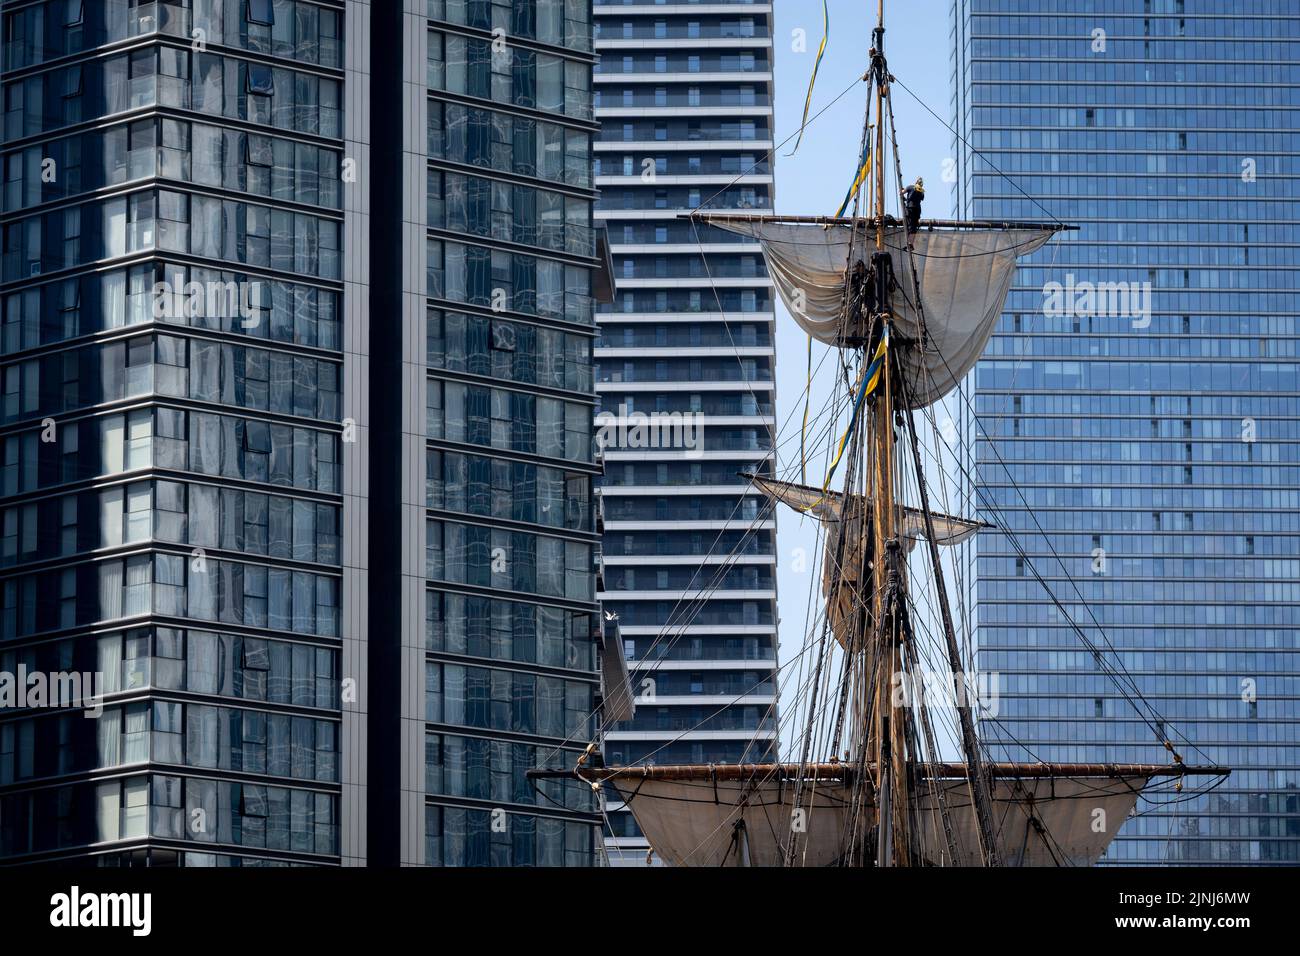 The crew of the replica sailing ship, Gotheborg, perform repairs and maintenance up the tall rigging while docked beneath the high-rise towers at South Quay, Canary Wharf in London Docklands, during its four-day visit to the capital before it continues its two-year around the world expedition to Shanghai, China, on 9th August 2022, in London, England. Londoners are invited to tour the decks of this facsimile of the original ship which sank off the Swedish coast in 1745. Its main cargo would have been tea, porcelain, herbs and silk on the China route. Stock Photo